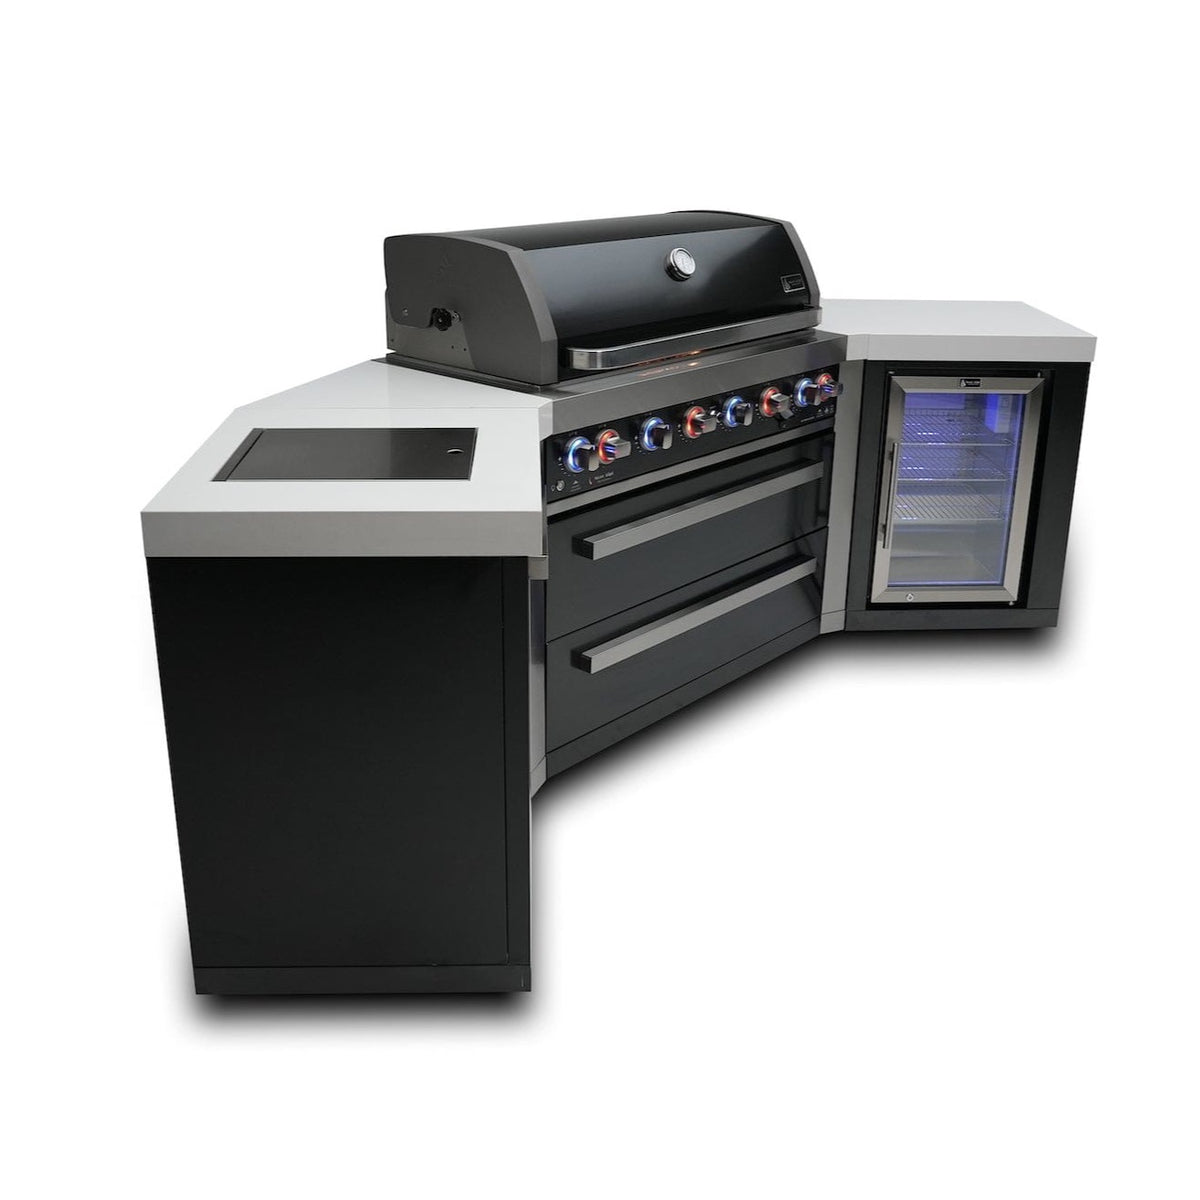 Mont Alpi Islands Mont Alpi 805 Black Stainless Steel Island with Fridge Cabinet + Two 45 Degree Corners / 6-Burner Grill, 2 Infrared Burners, Fridge, Stainless Steel / MAi805-BSS45FC